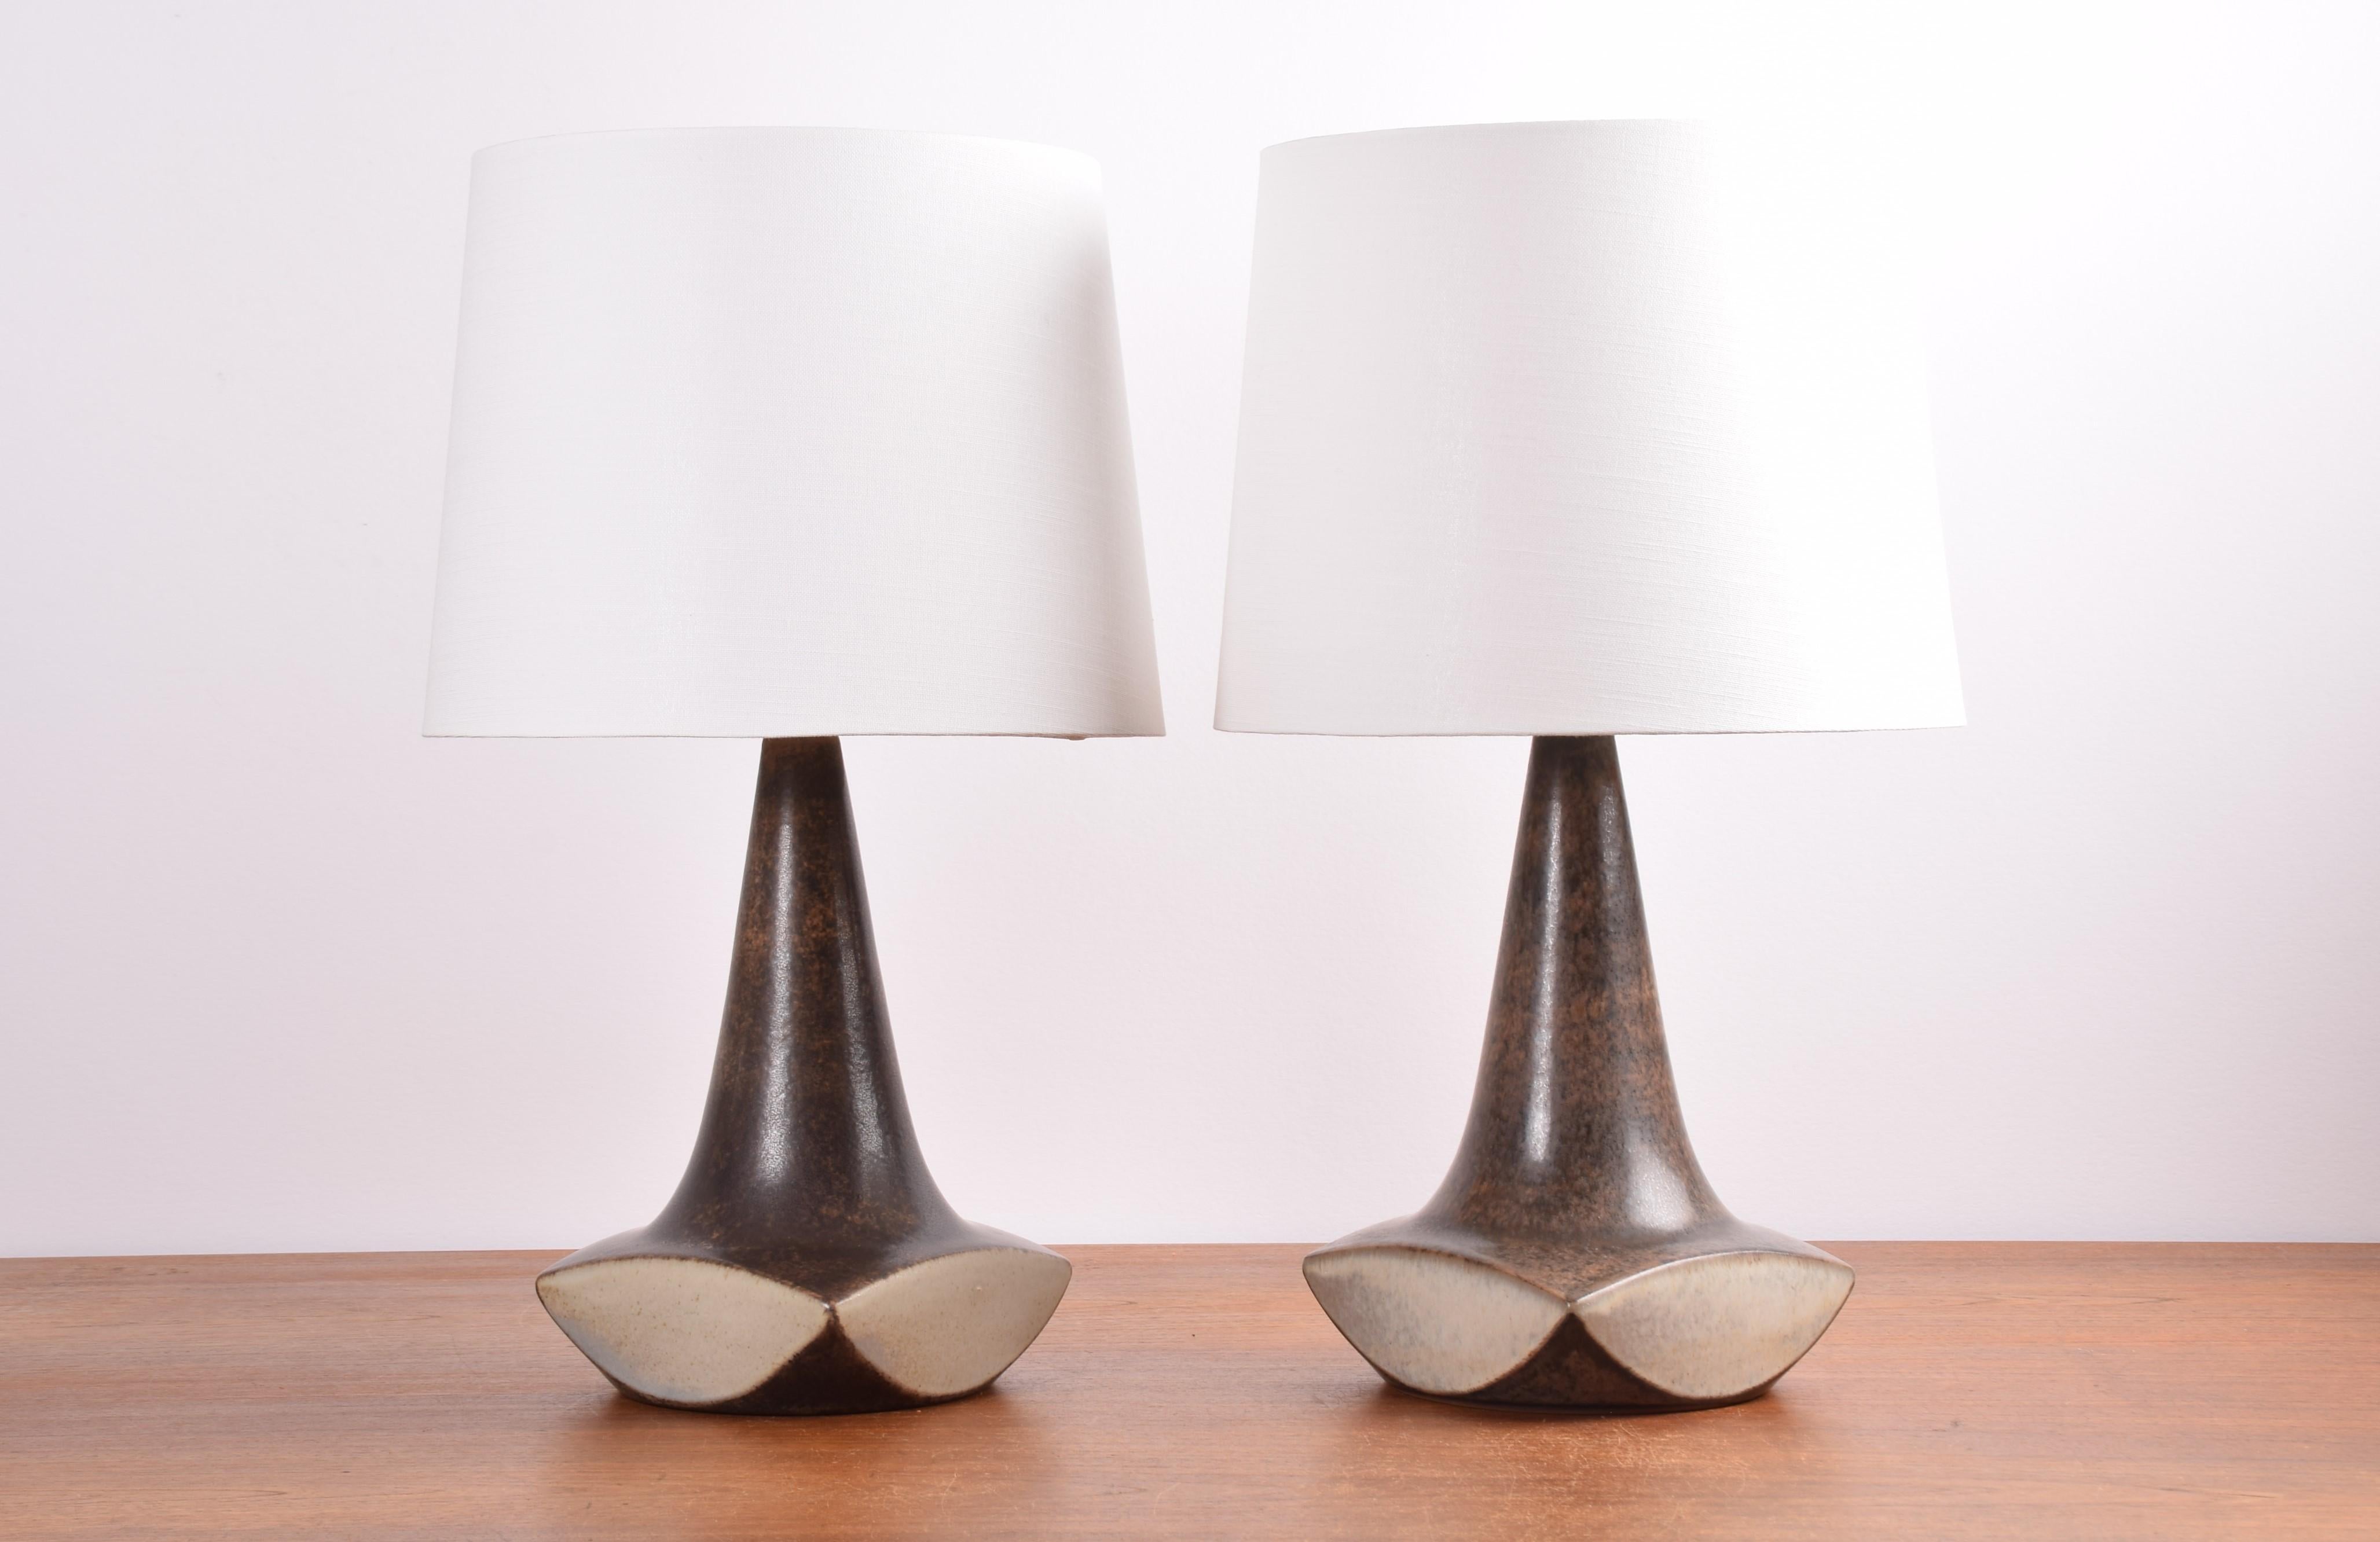 Pair of Danish mid-century sculptural table lamps by Marianne Starck for Michael Andersen & Søn.
Brown and beige sand colored glaze.
Made circa 1960s. 

One of the lamps wears original MA&S paper sticker, the other is marked with MS (for